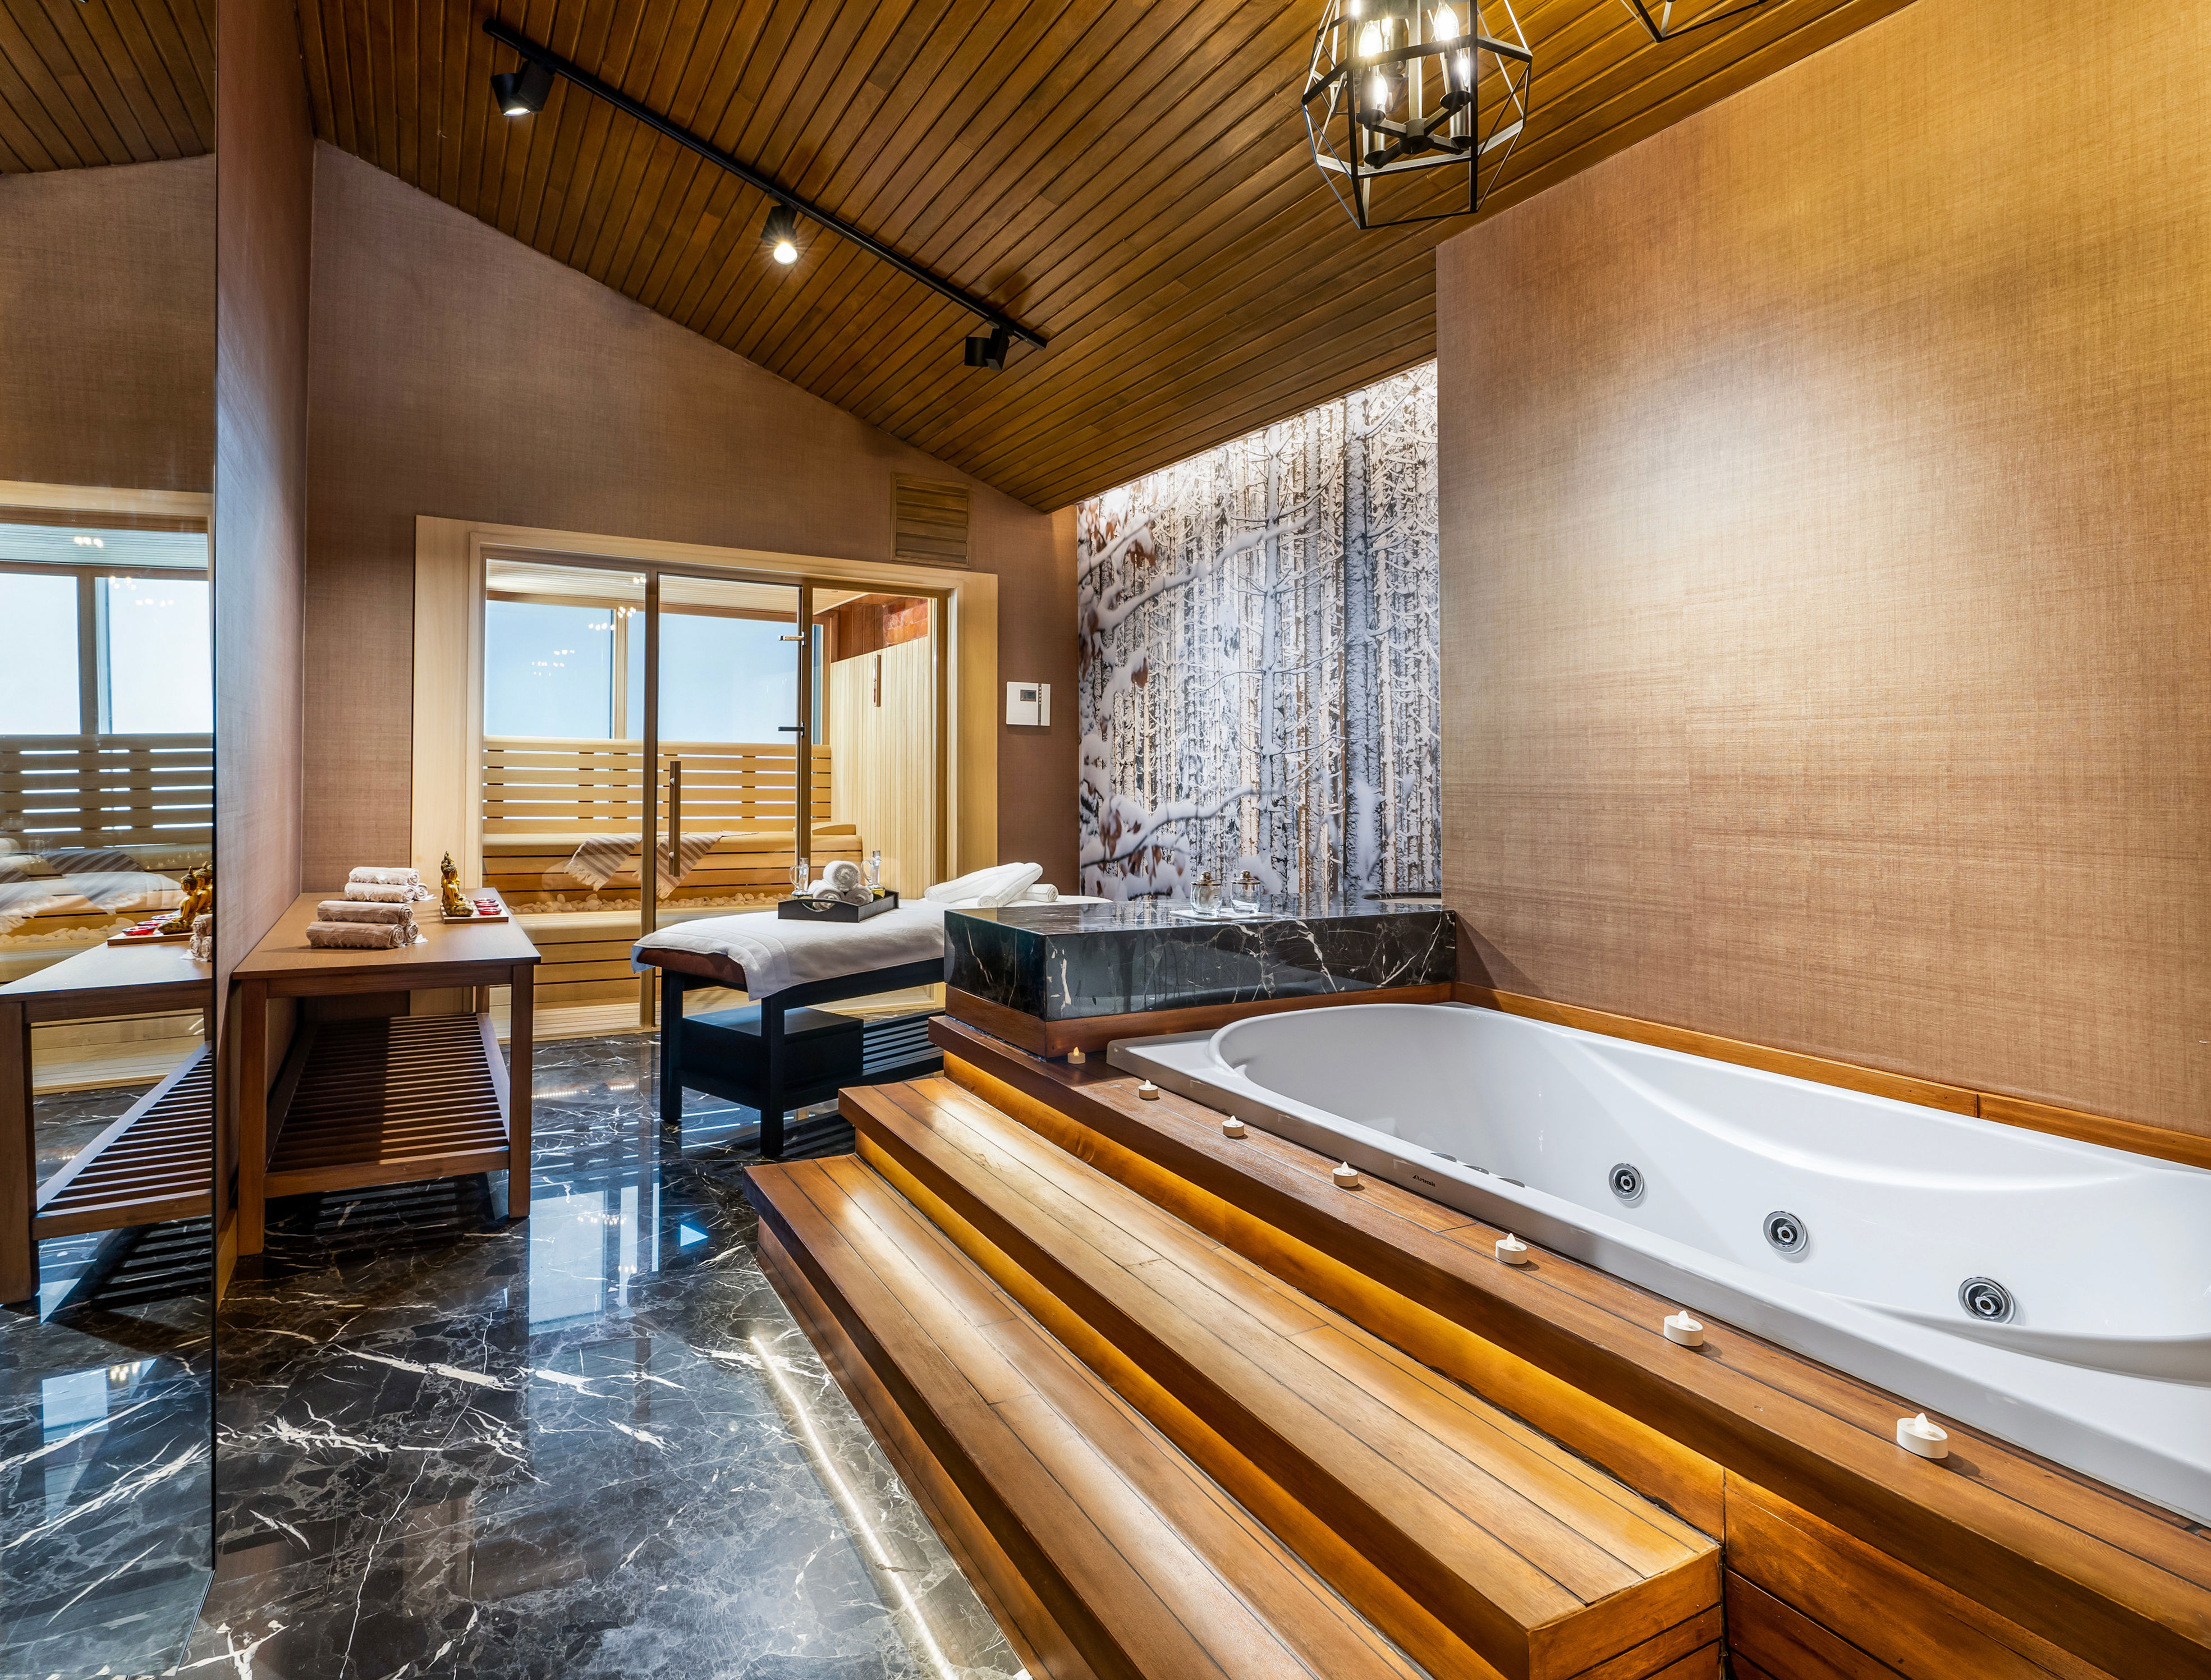 The four-bedroom <a href="https://kayahotels.com/en/oteller/kaya-palazzo-ski-mountain-resort/konaklama/palazzo-luxury-chalets">Palazzo Luxury Chalets</a> at this ski resort in Kartalkaya—one of Turkey’s most popular ski destinations—feature a massage room, sauna, and outdoor hot tub. Rustic details like wood-paneled walls and plaid upholstery are balanced with modern wall murals, soaring ceilings, and two-story high windows, making this contemporary chalet the ideal setting for unwinding after a day on the slopes. Further relaxation is found at the <a href="https://kayahotels.com/en/oteller/kaya-palazzo-ski-mountain-resort/spa-fitness">Palazzo Spa & Wellness Center</a> which has Turkish baths, saunas, steam rooms, 11 massage rooms, a fitness center, and a heated pool with views of the surrounding Köroğlu Mountains.<p>Sign up for our newsletter to get the latest in design, decorating, celebrity style, shopping, and more.</p><a href="https://www.architecturaldigest.com/newsletter/subscribe?sourceCode=msnsend">Sign Up Now</a>